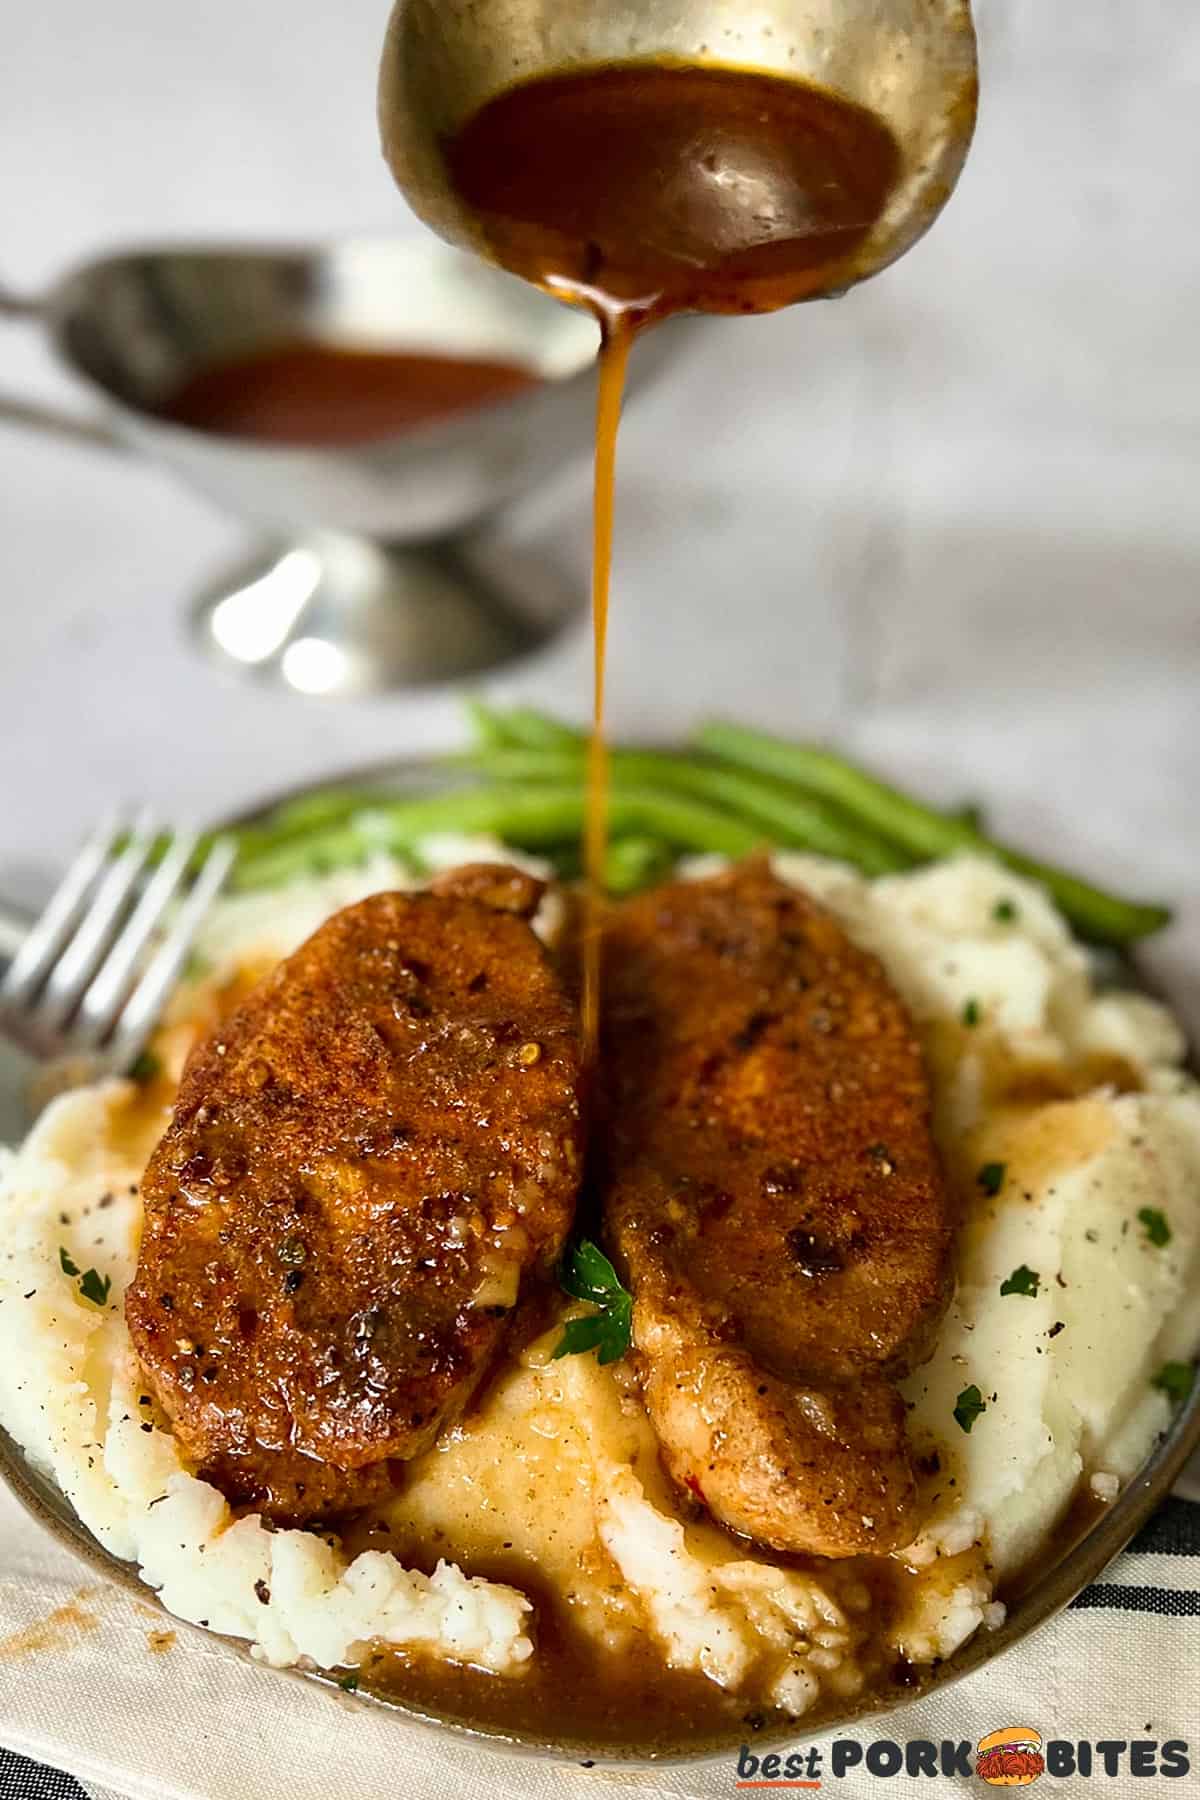 gravy being poured from a spoon on to a plate of mashed potatoes, pork chops and green beans